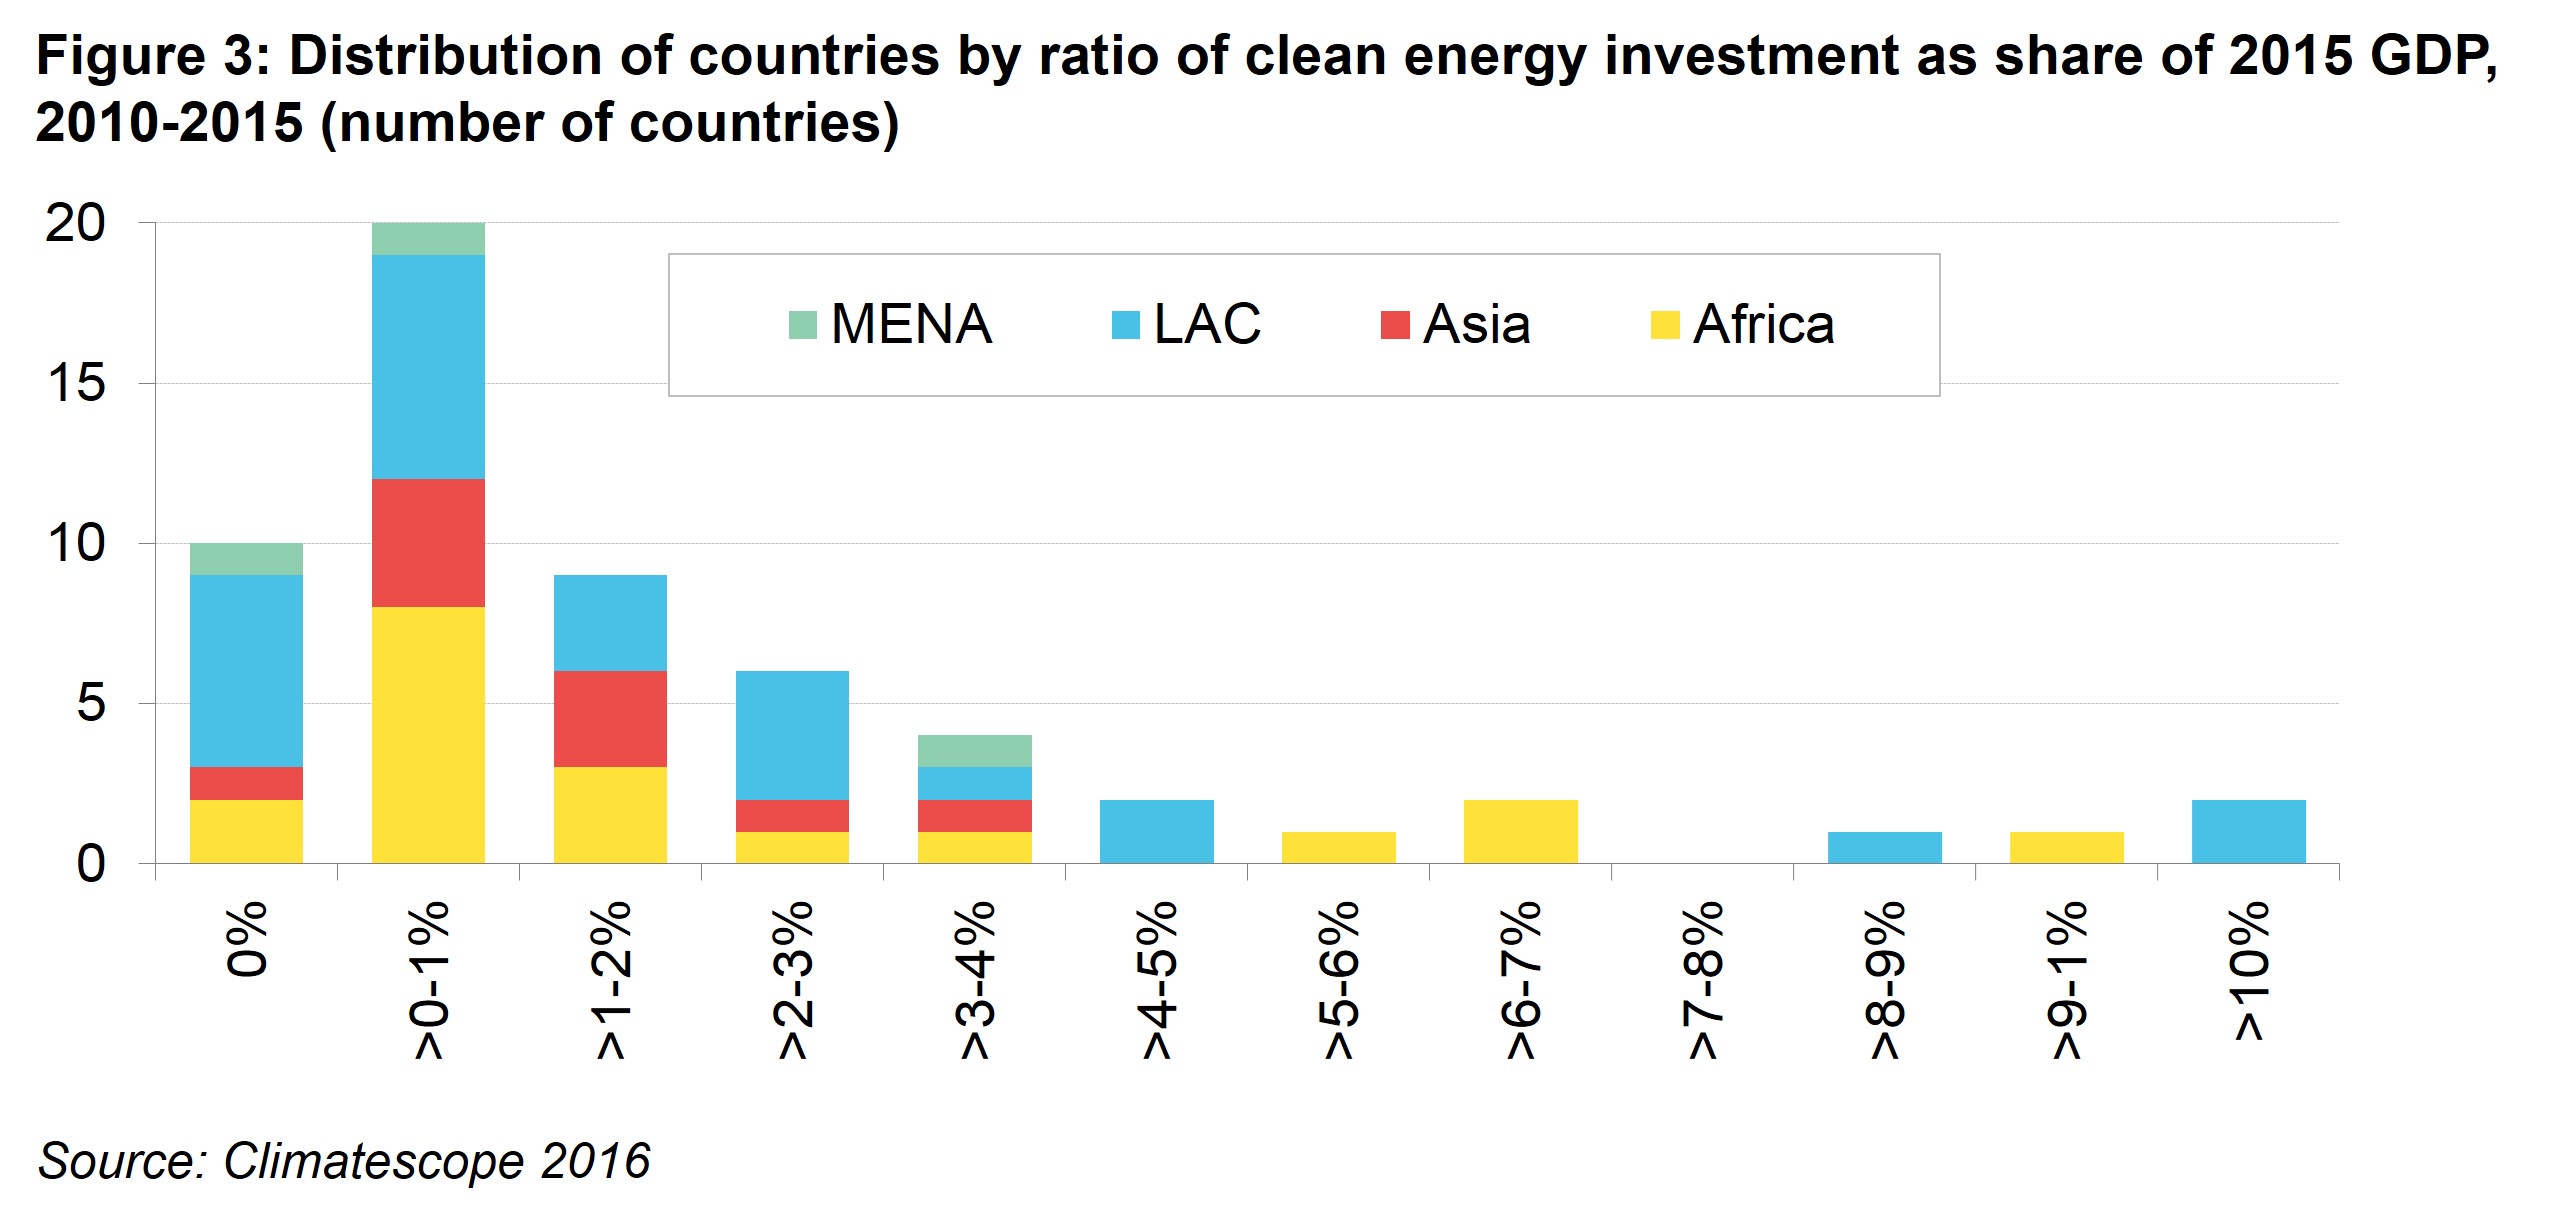 PII Fig 3 - Distribution of countries by ratio of clean energy investment as share of 2015 GDP, 2010-2015 (number of countries)